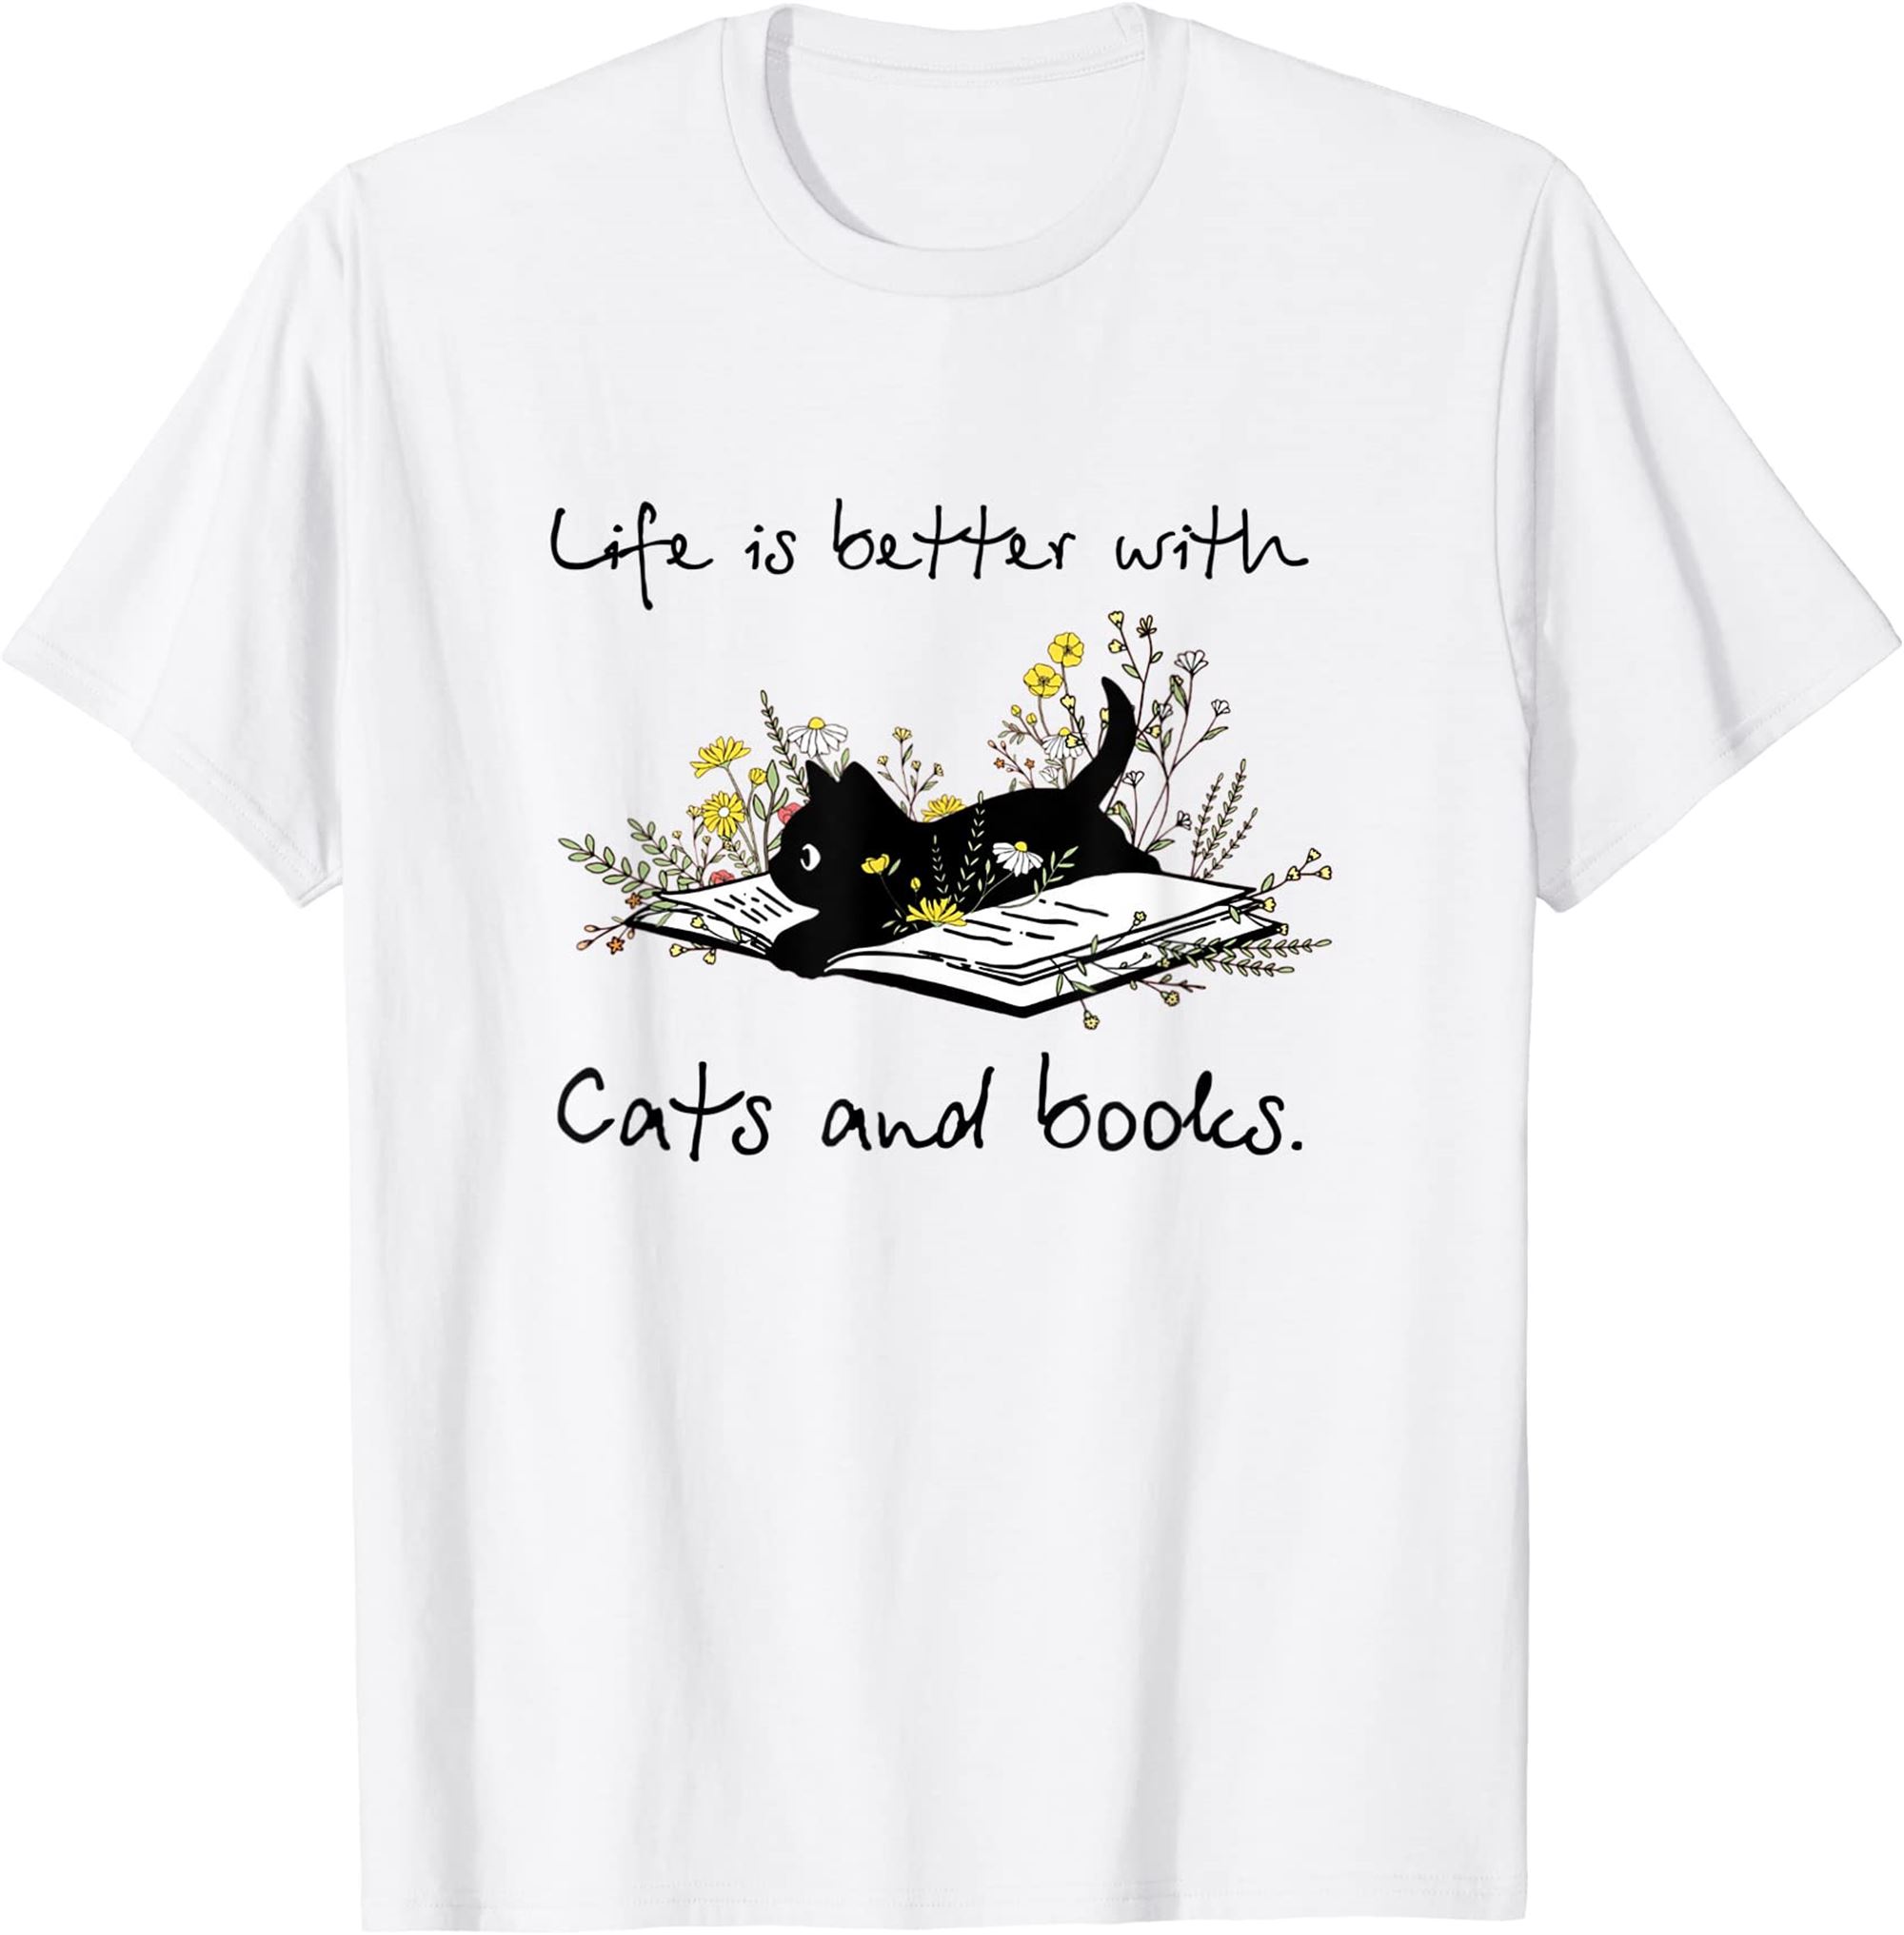 Cat Book Shirt For Women Life Is Better With Cats And Books T-shirt Full Size Up To 5xl